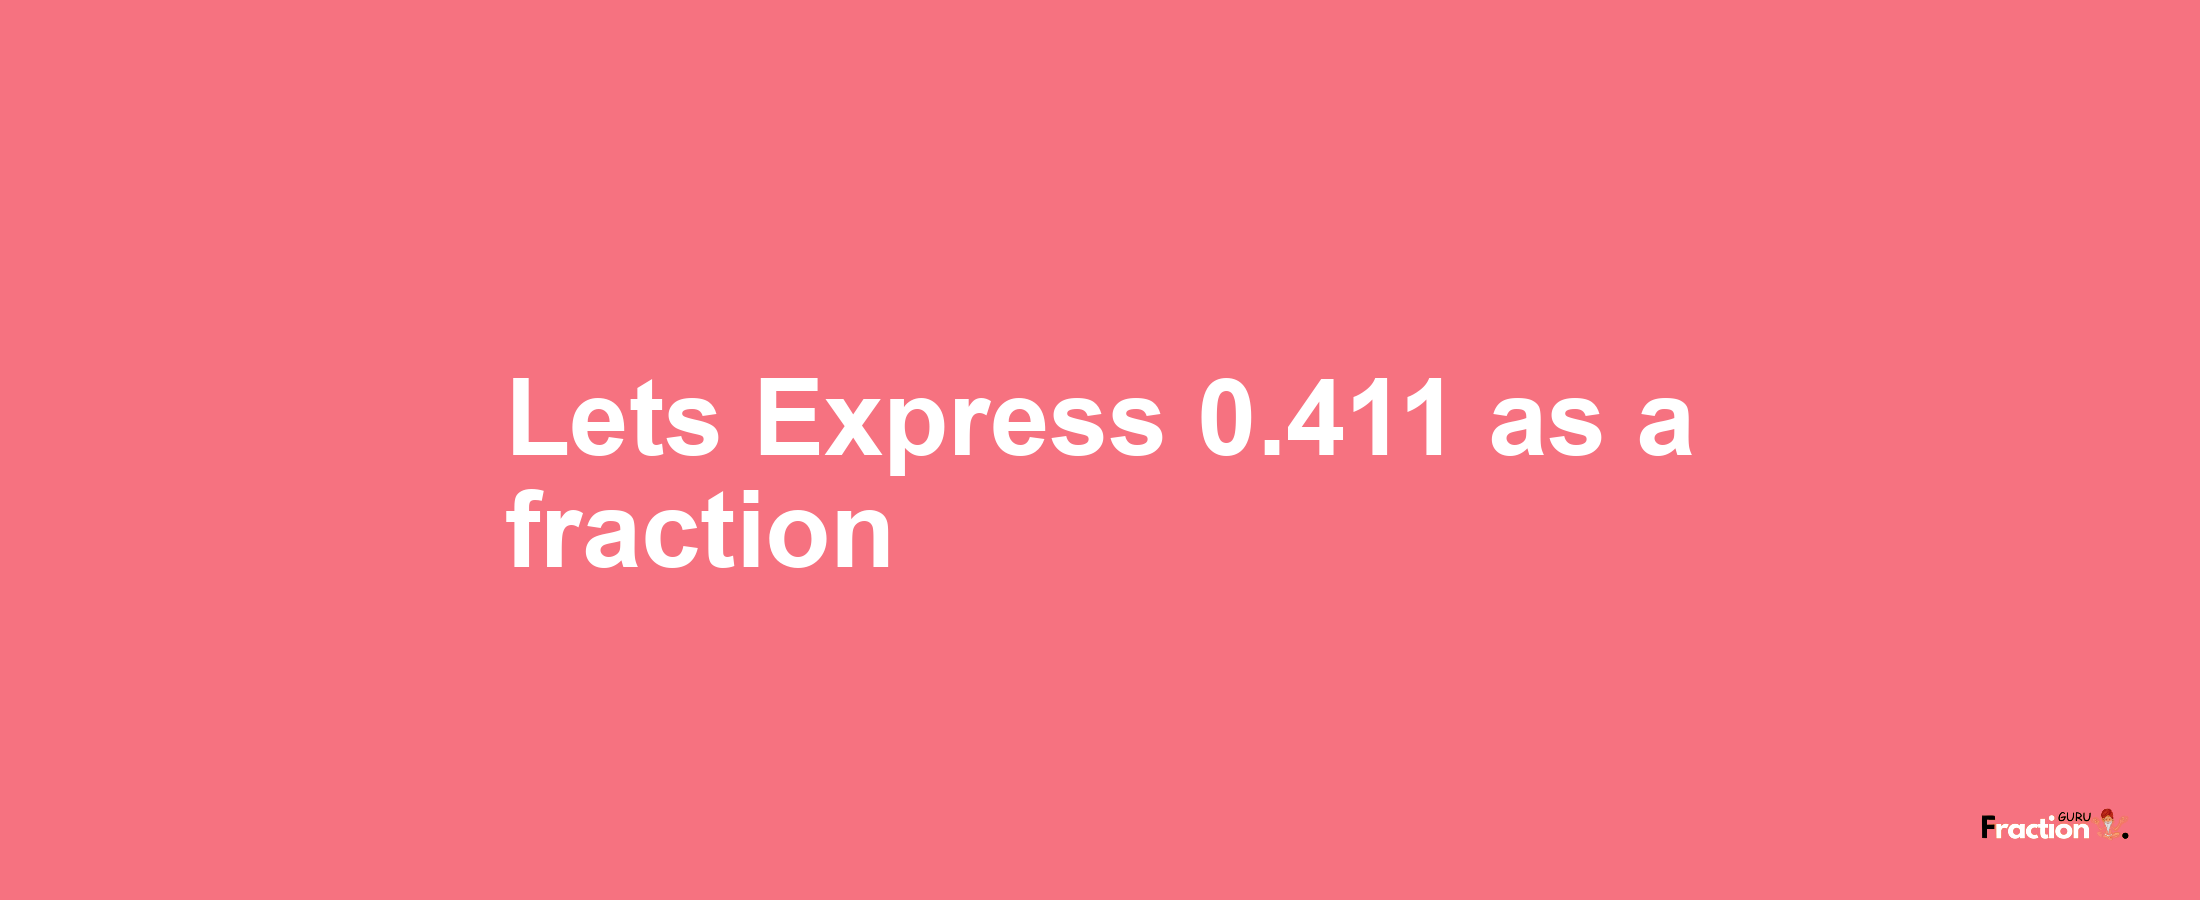 Lets Express 0.411 as afraction